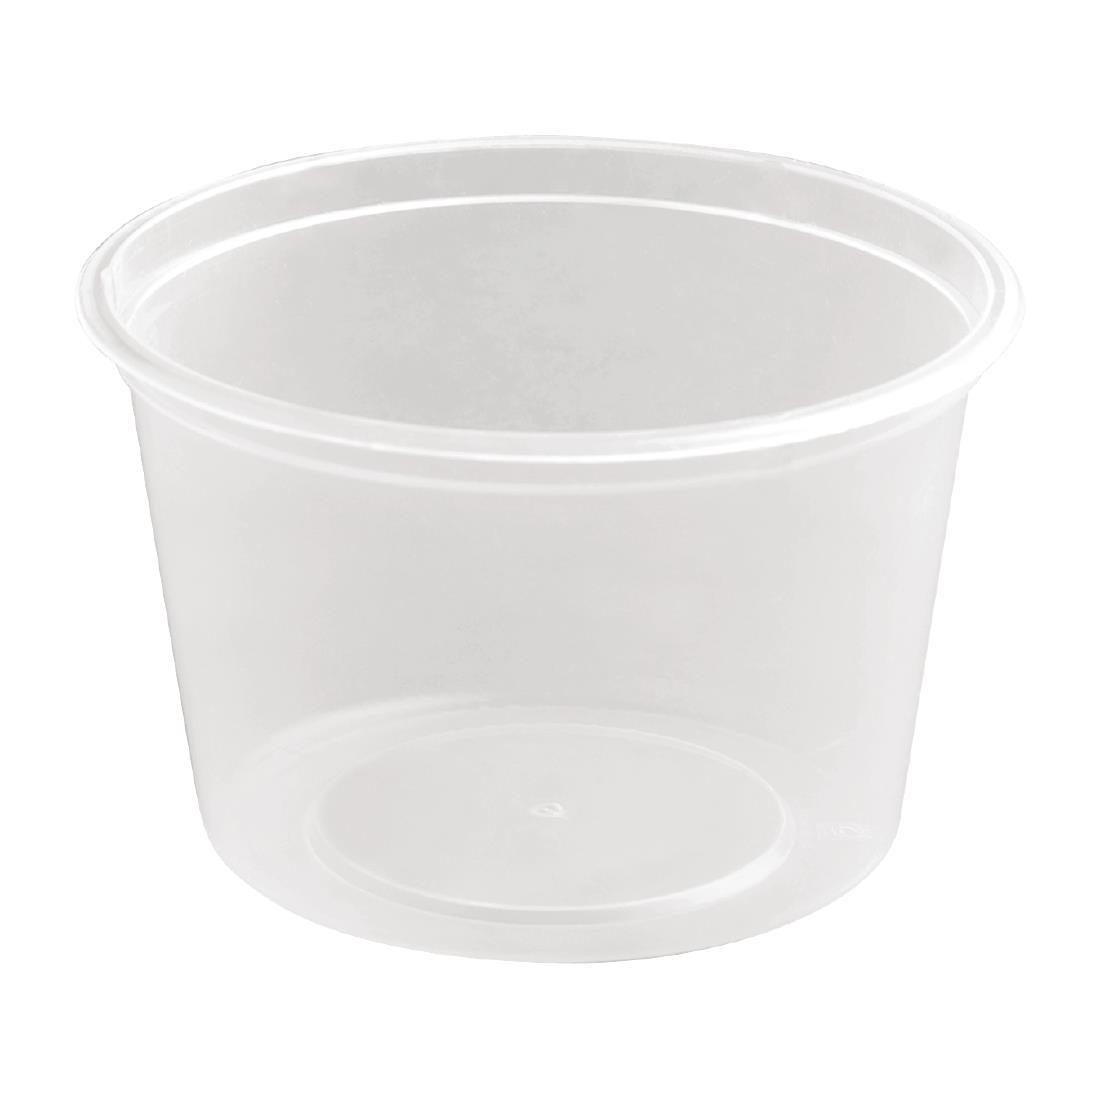 Fiesta Recyclable Plastic Microwavable Deli Pots 100ml / 3.5oz (Pack of 100) - CT286  - 2